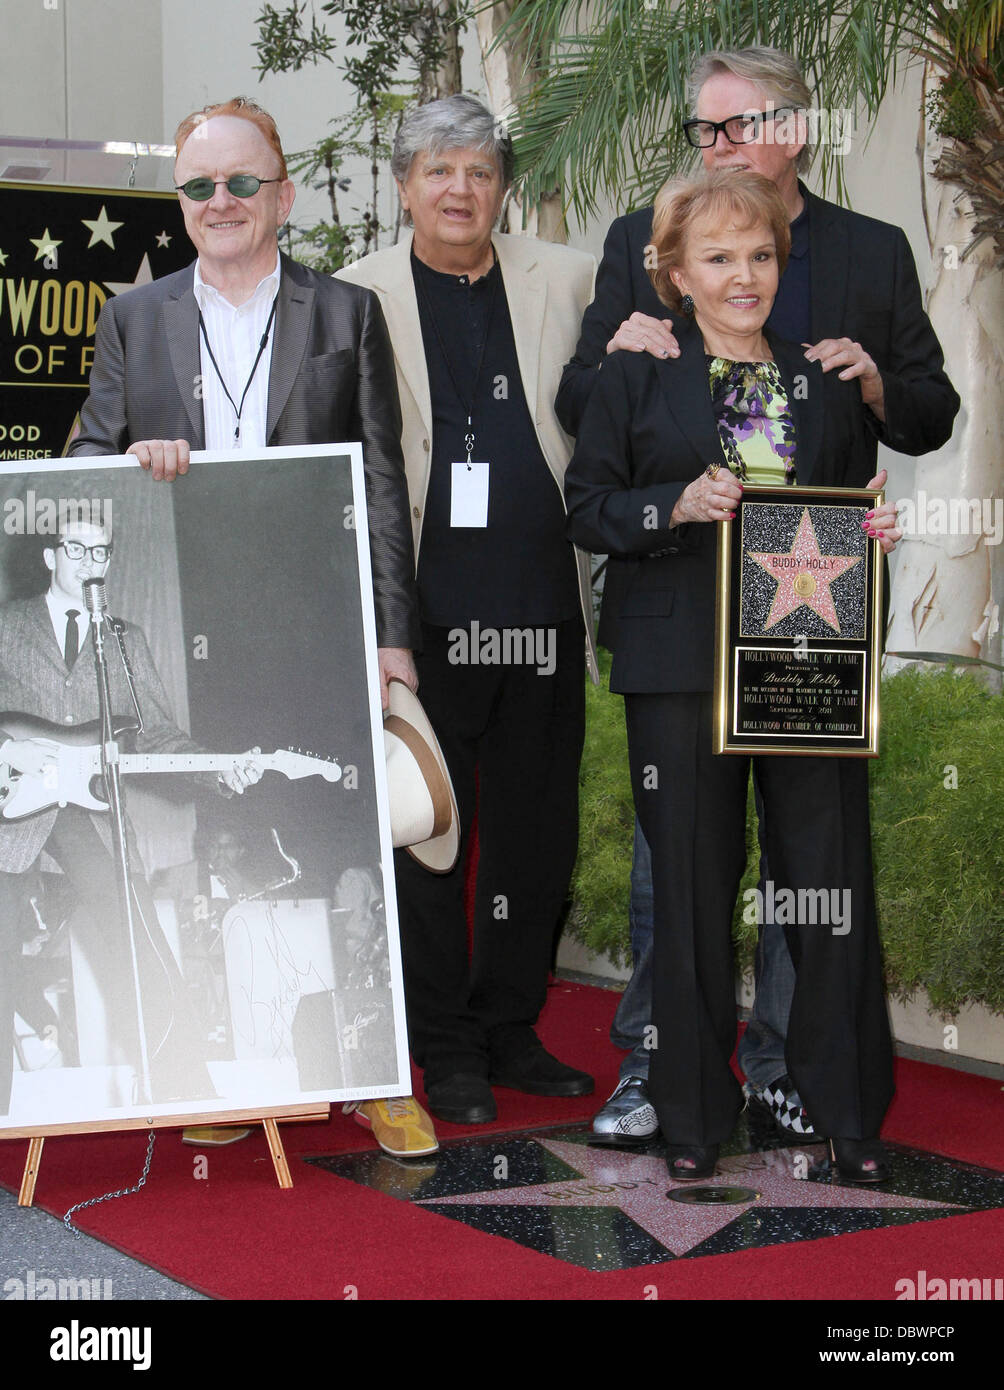 Peter Asher, Phil Everly, Maria Elena Holly and Gary Busey Buddy Holly Star Unveiling On The Hollywood Walk Of Fame Held In Front of Capital Records     Hollywood, California - 07.09.11 Stock Photo